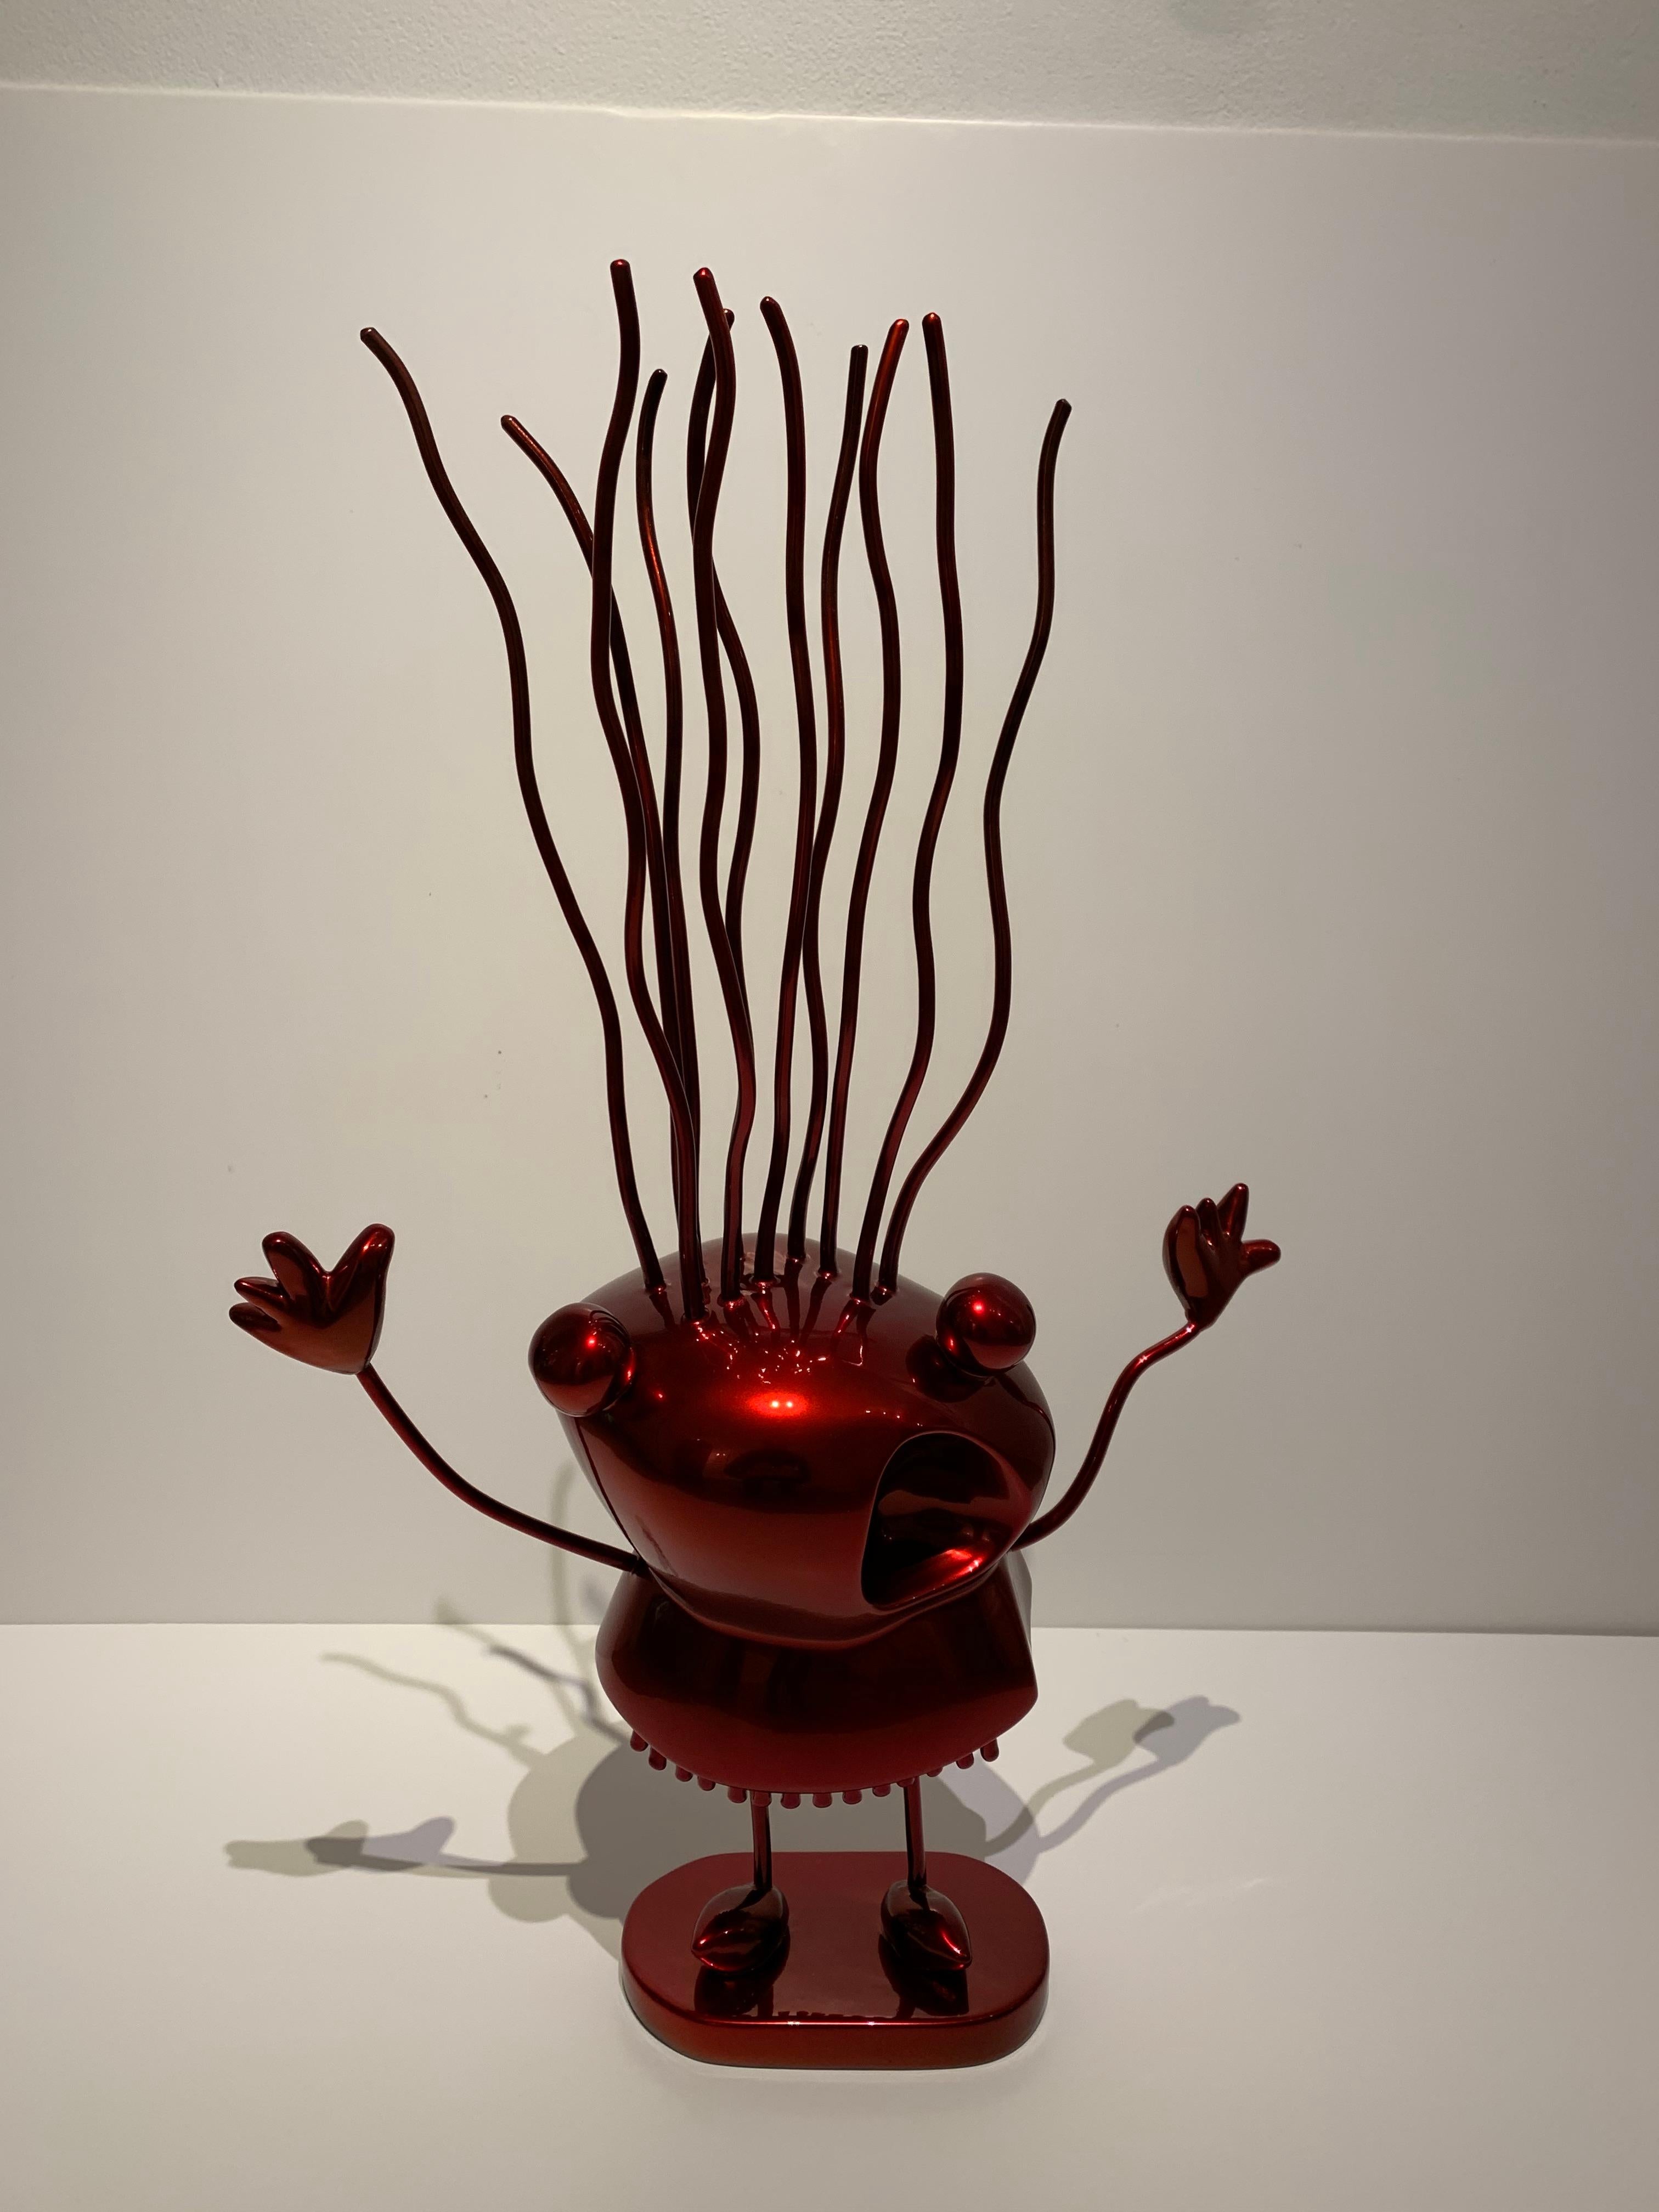 Xavi Carbonell, Le Petite Folle, 2019, Hi-Gloss Red Painted Sculpture 1